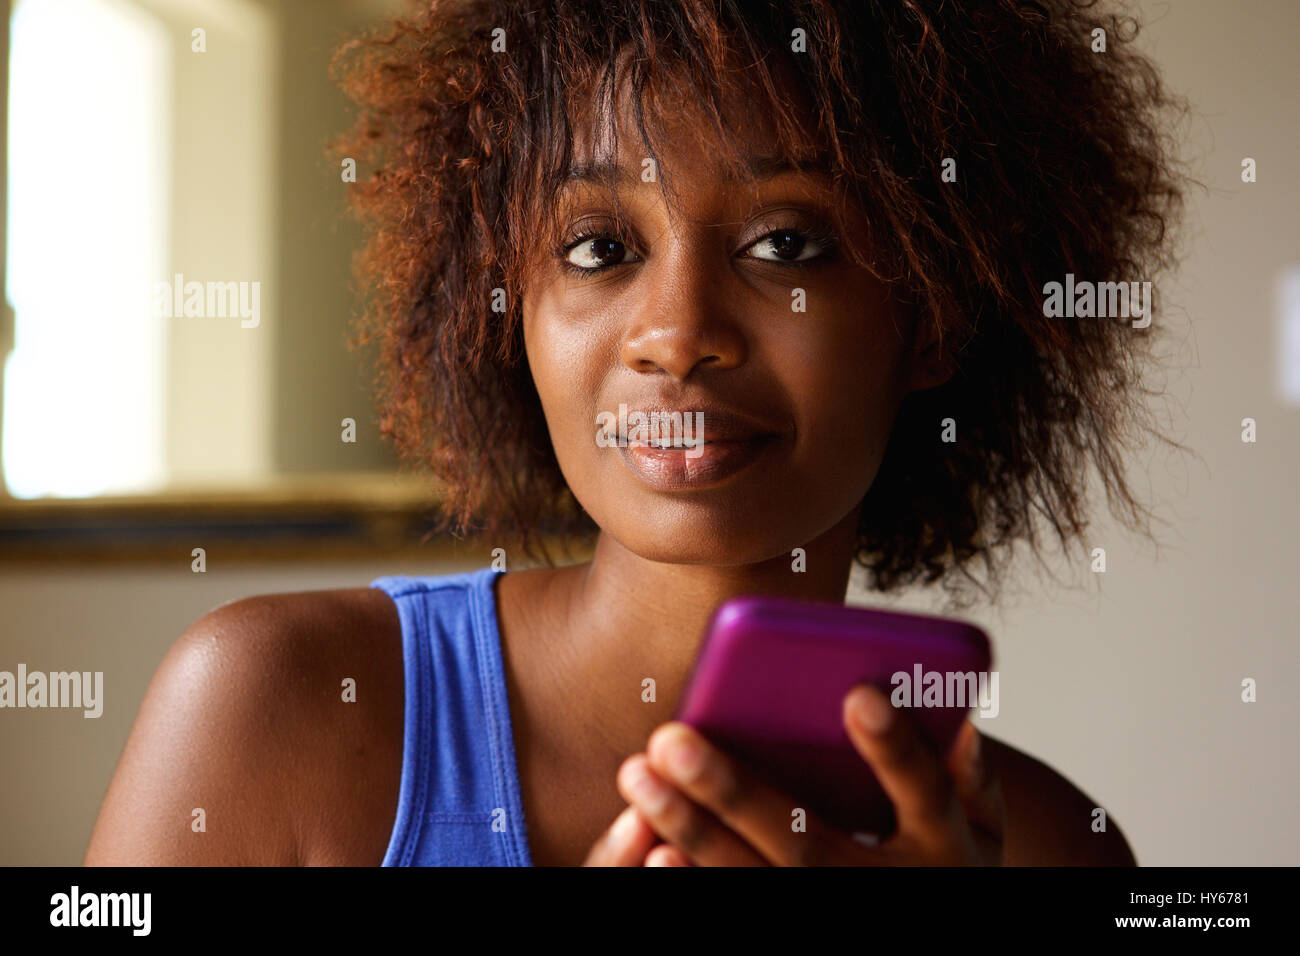 Close up portrait of a young african american woman with cell phone Banque D'Images